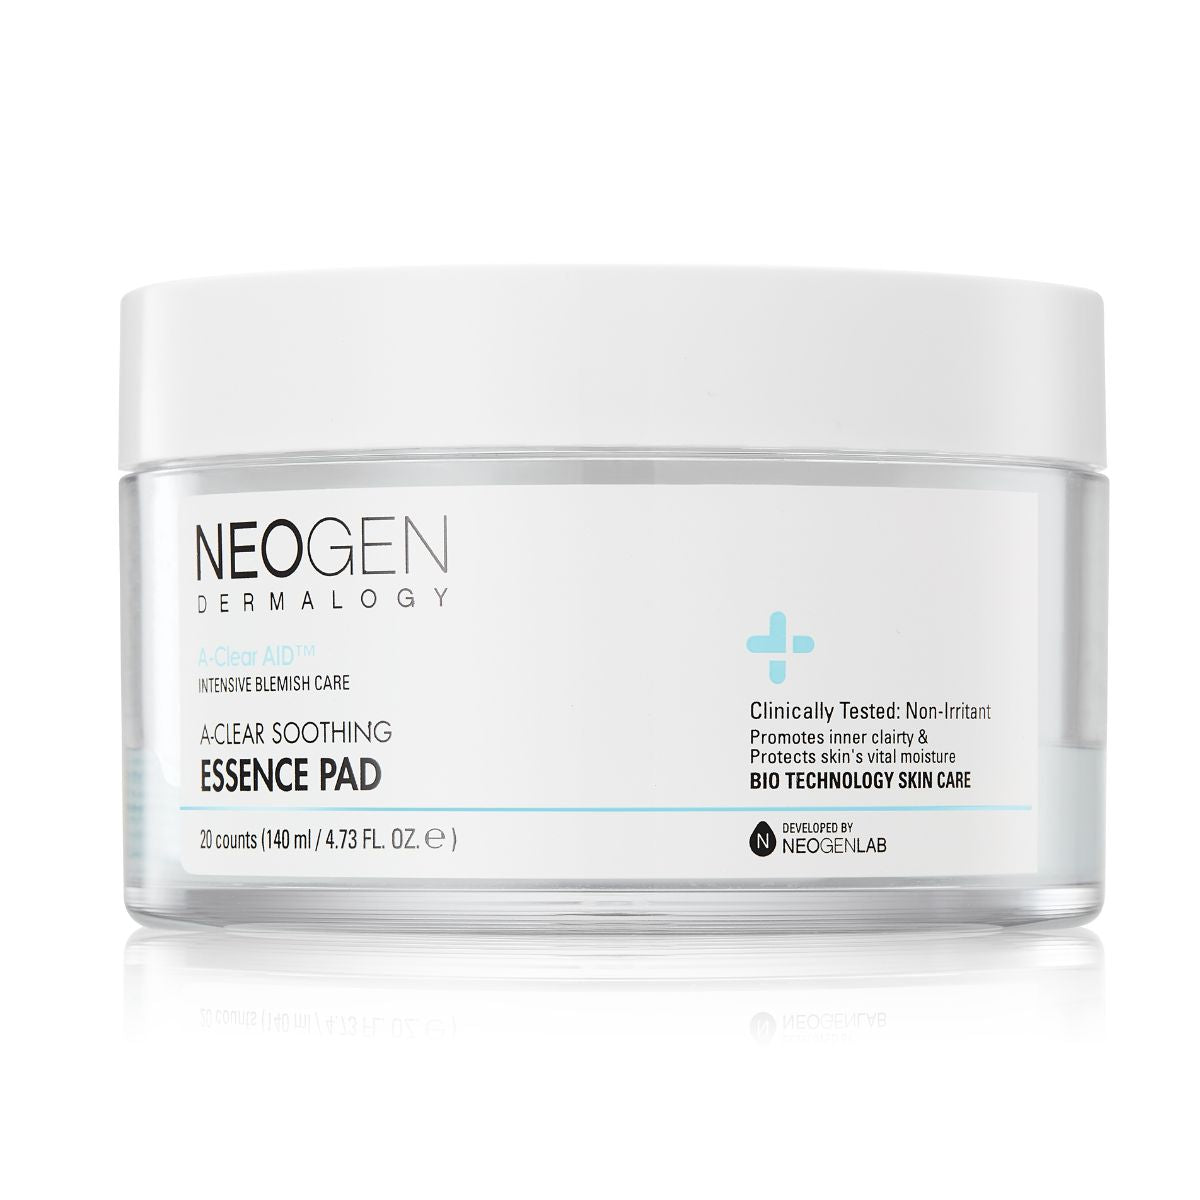 NEOGEN A-CLEAR SOOTHING ESSENCE PAD 20 PADS - skin care